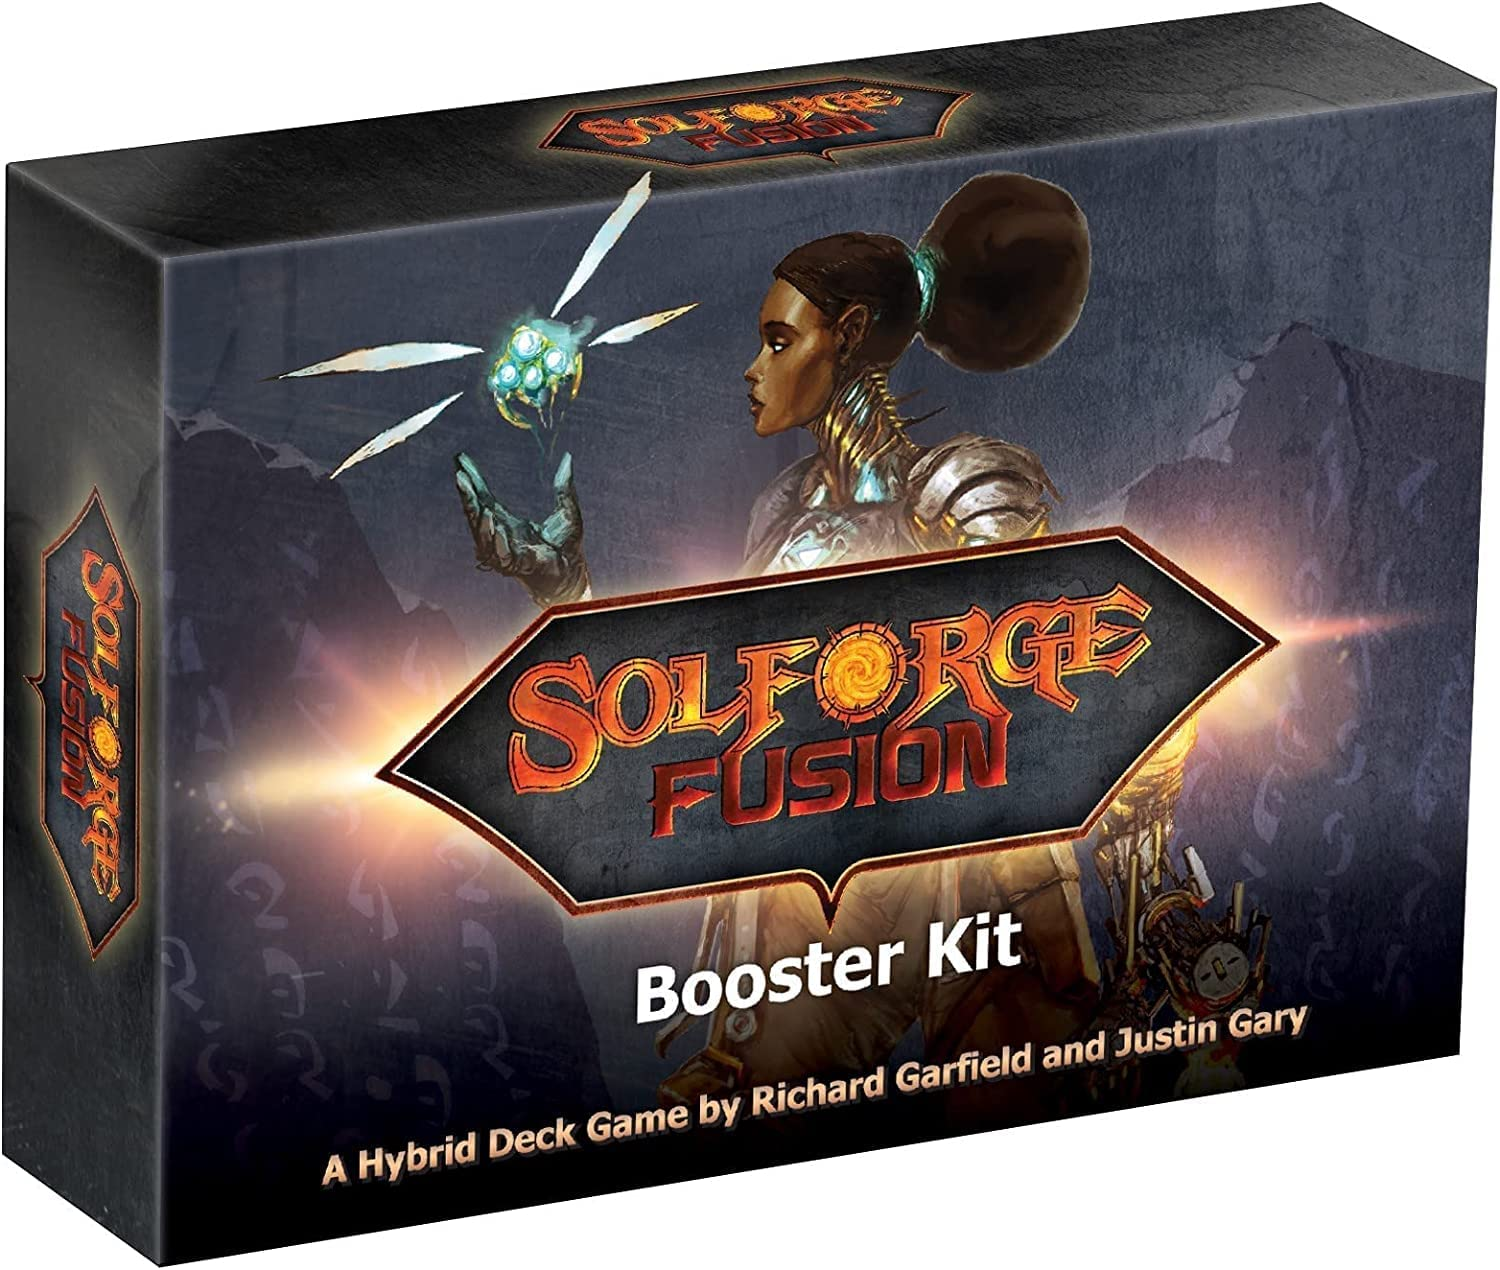 Sol Forge Fusion Booster Kit